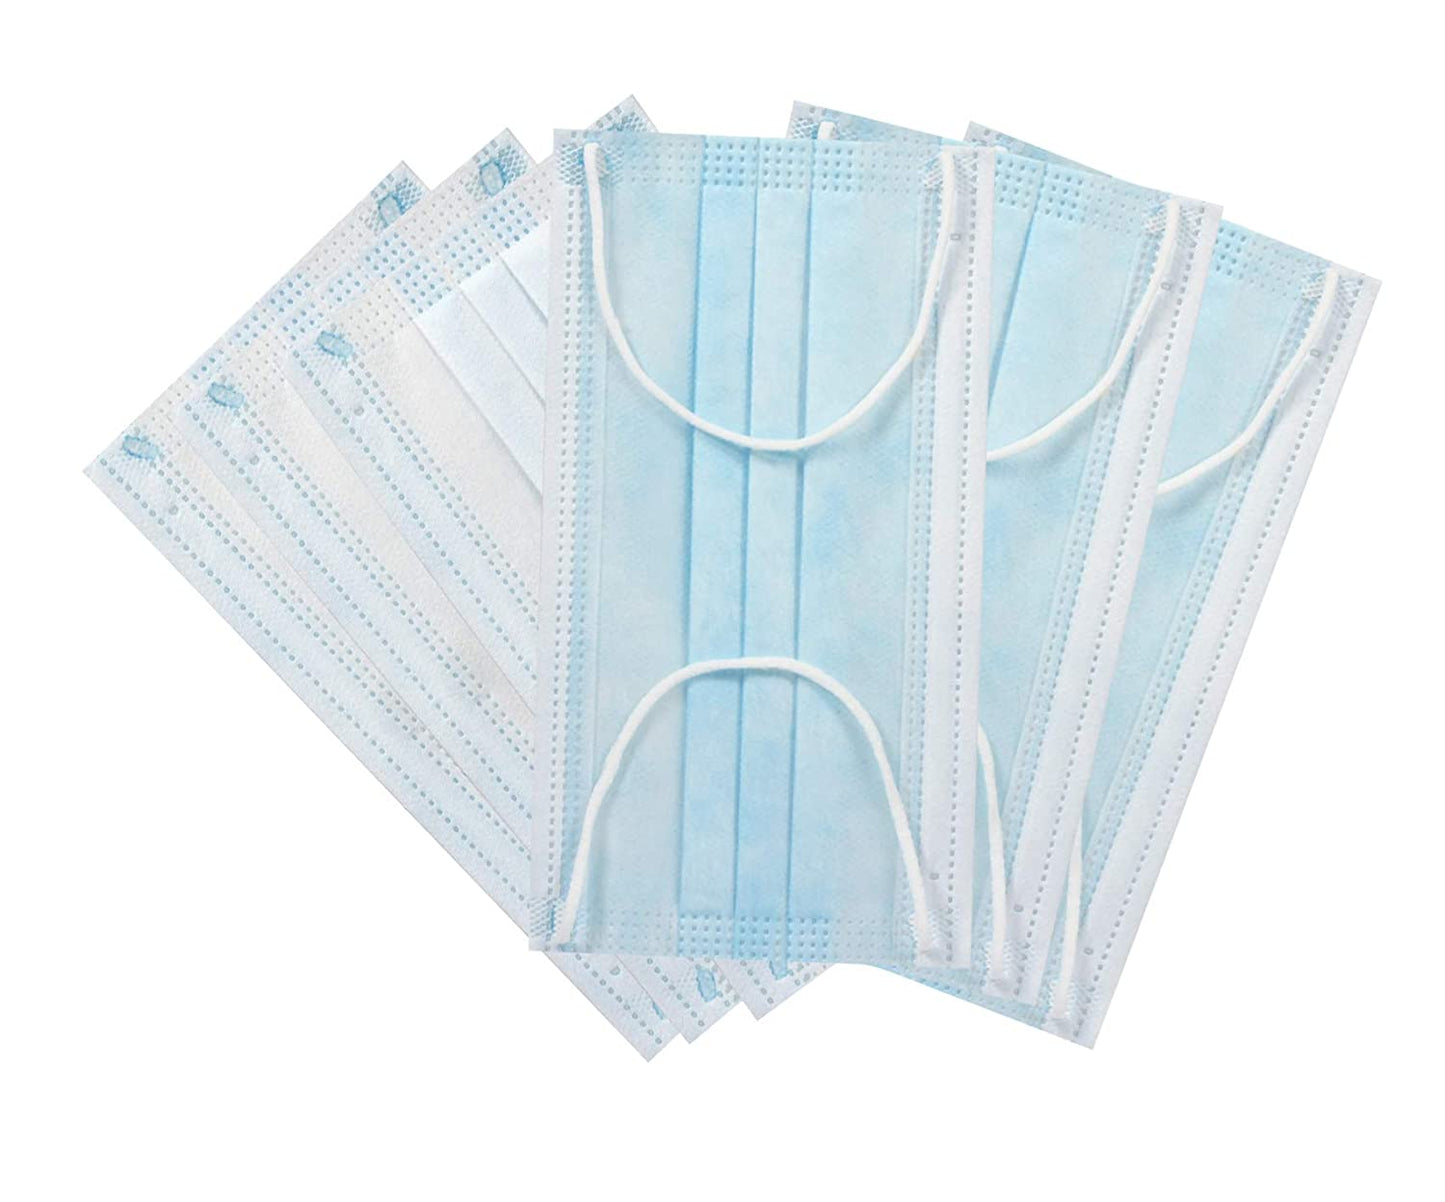 Airgoesin 50/Box Medical Use 3 Ply Safety Face Masks Breathable With Elastic Ear Loops Disposable Face Protection Filter Medical Mask